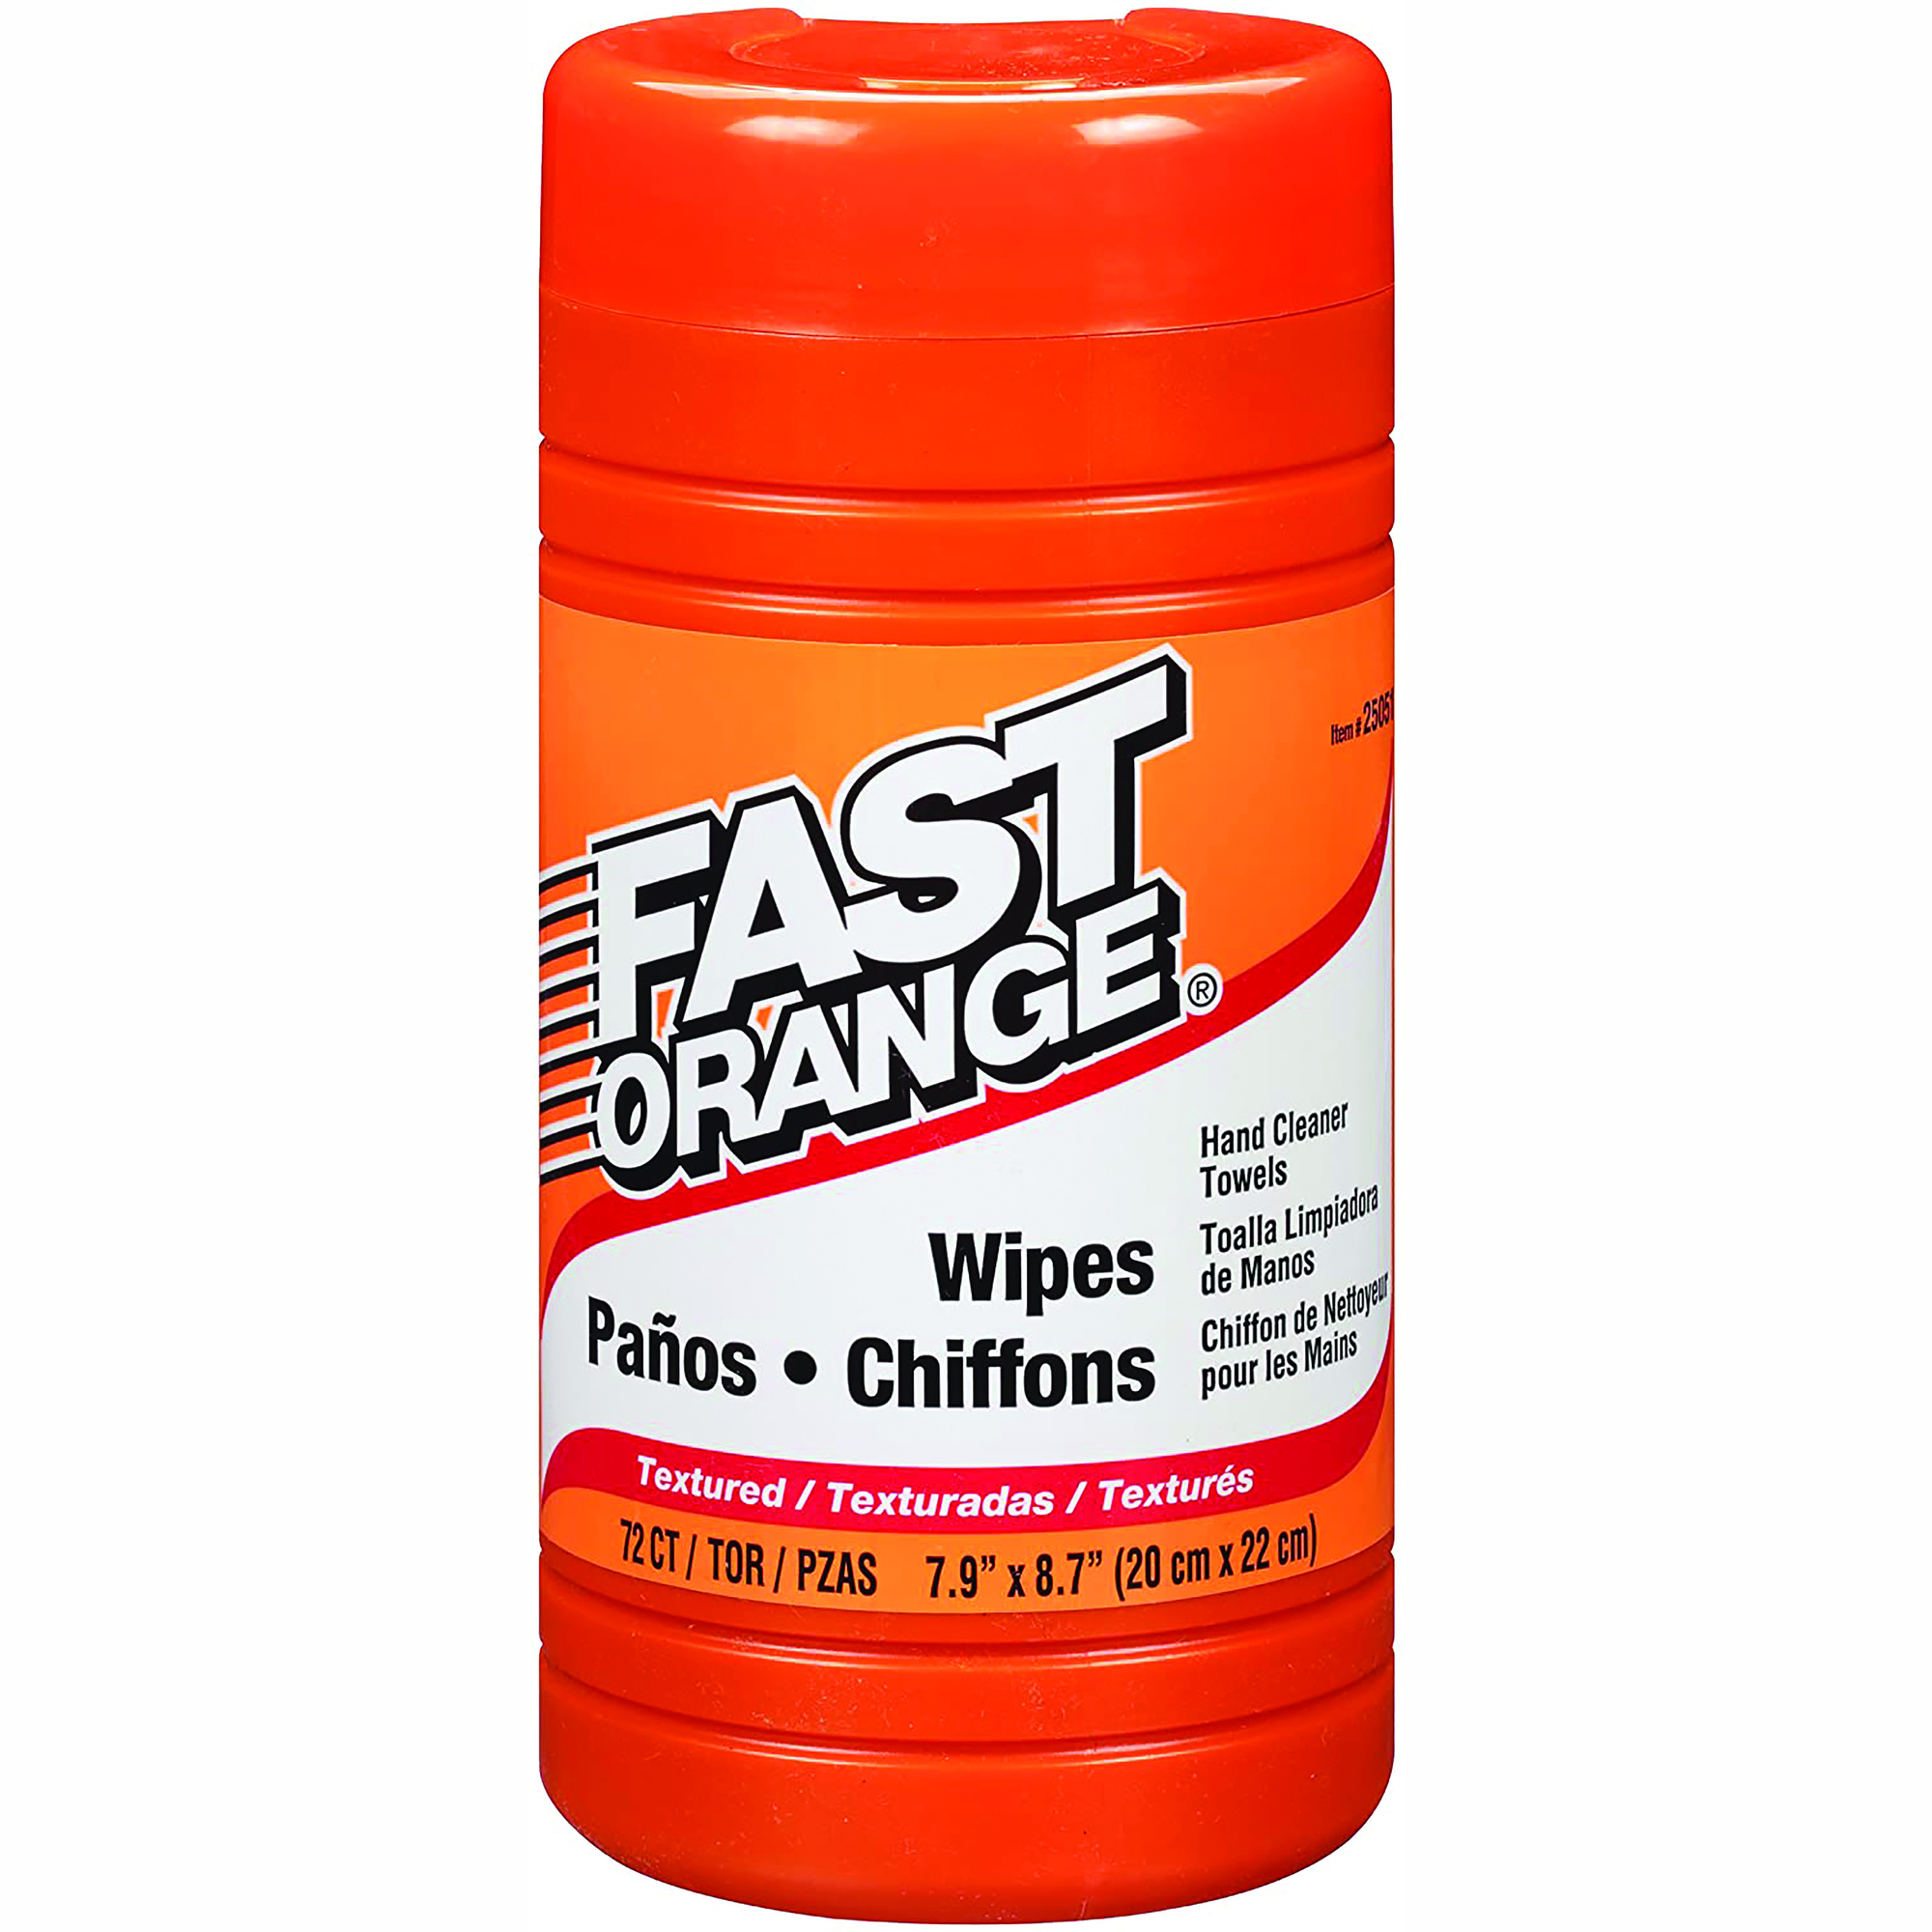 Fast Orange Wipes, Hand Cleaner Towels, Dual-Sided - 72 count